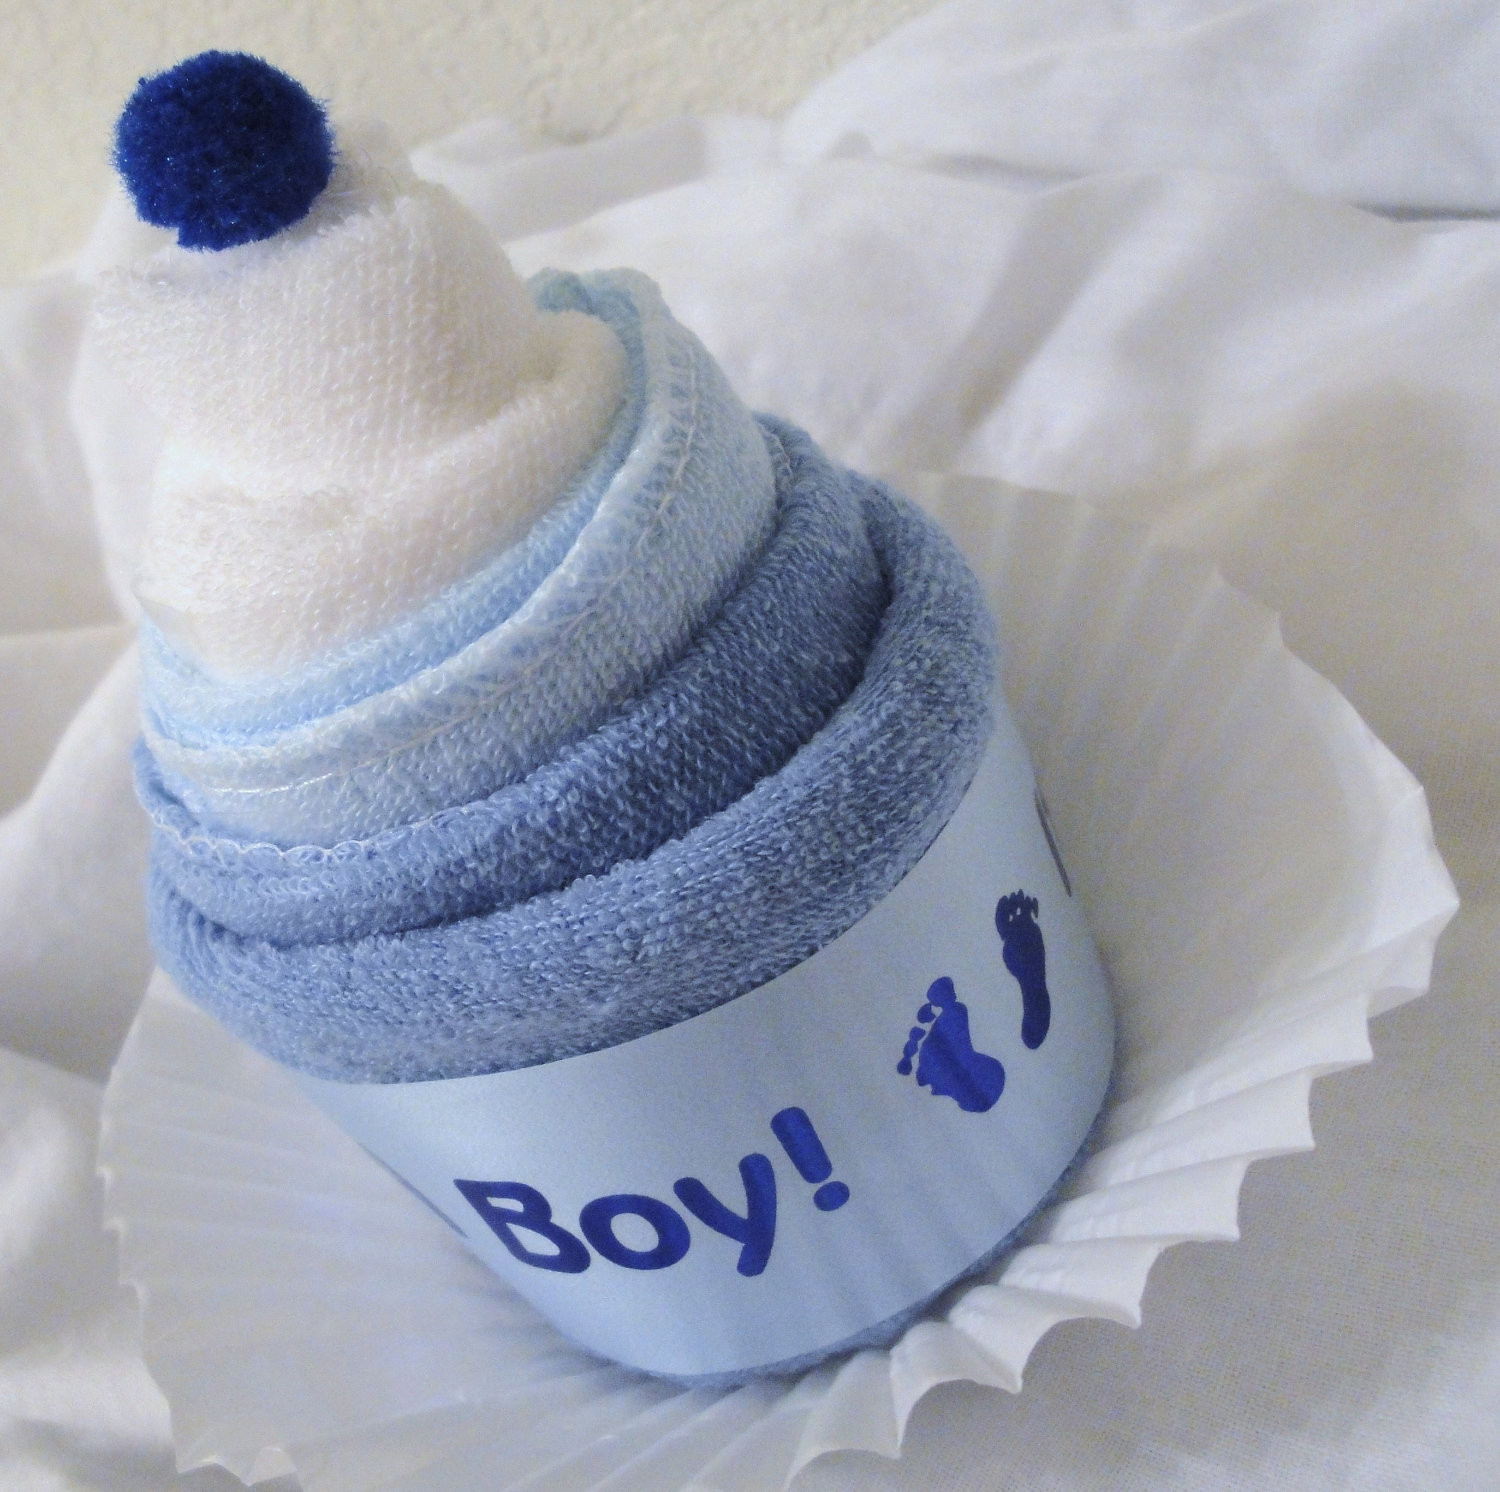 Baby Shower Gift Ideas For A Boy
 Baby Shower Favors Ideas For Boys